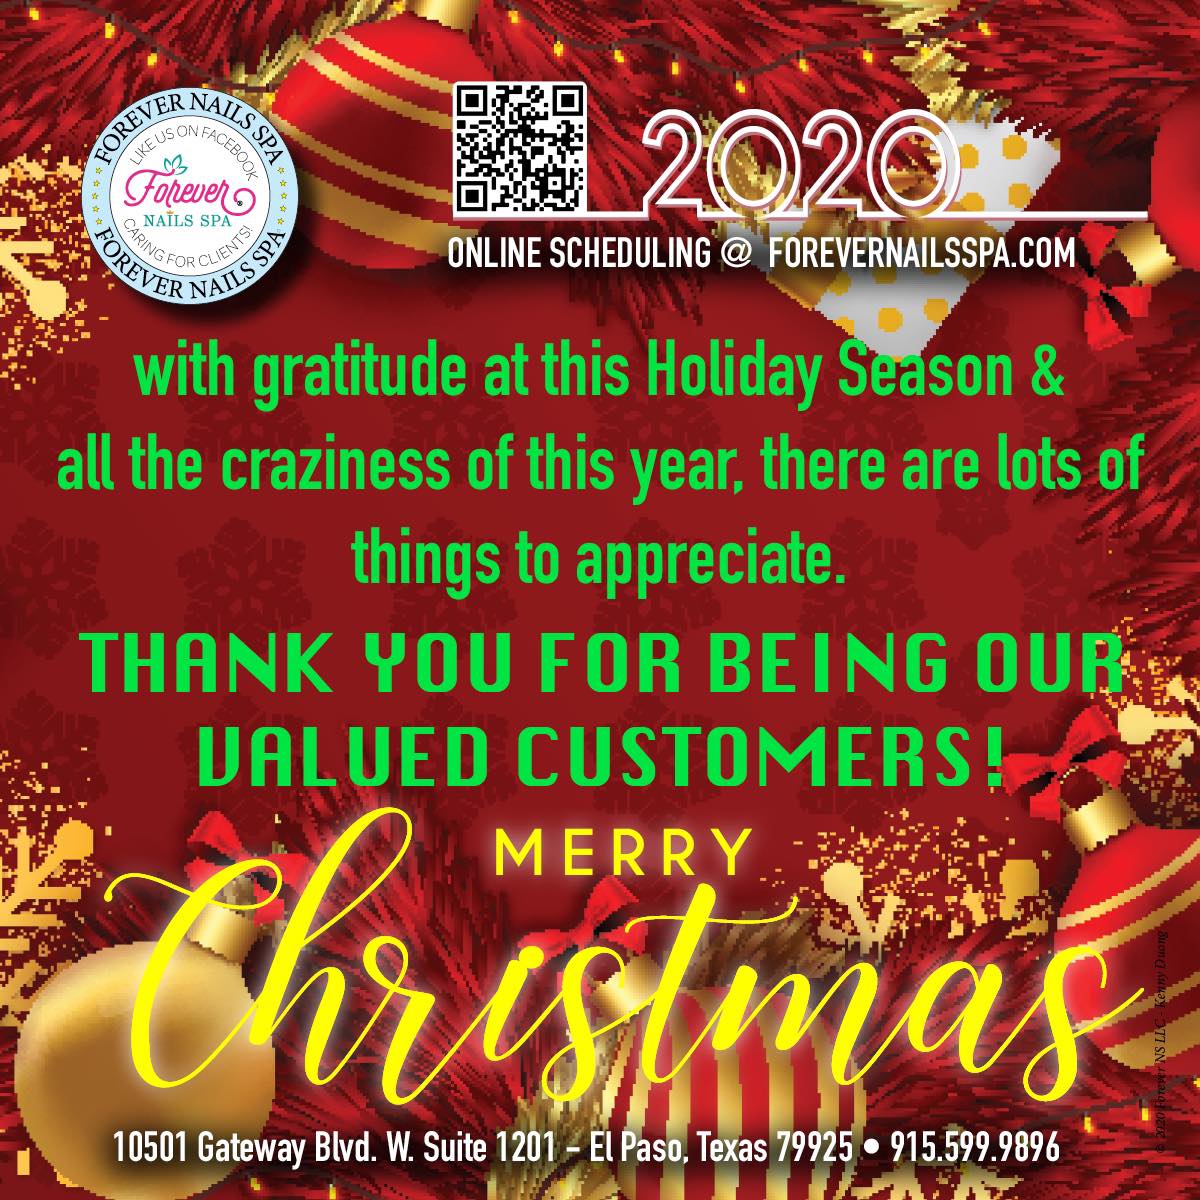 Thank You for being our valued customers!